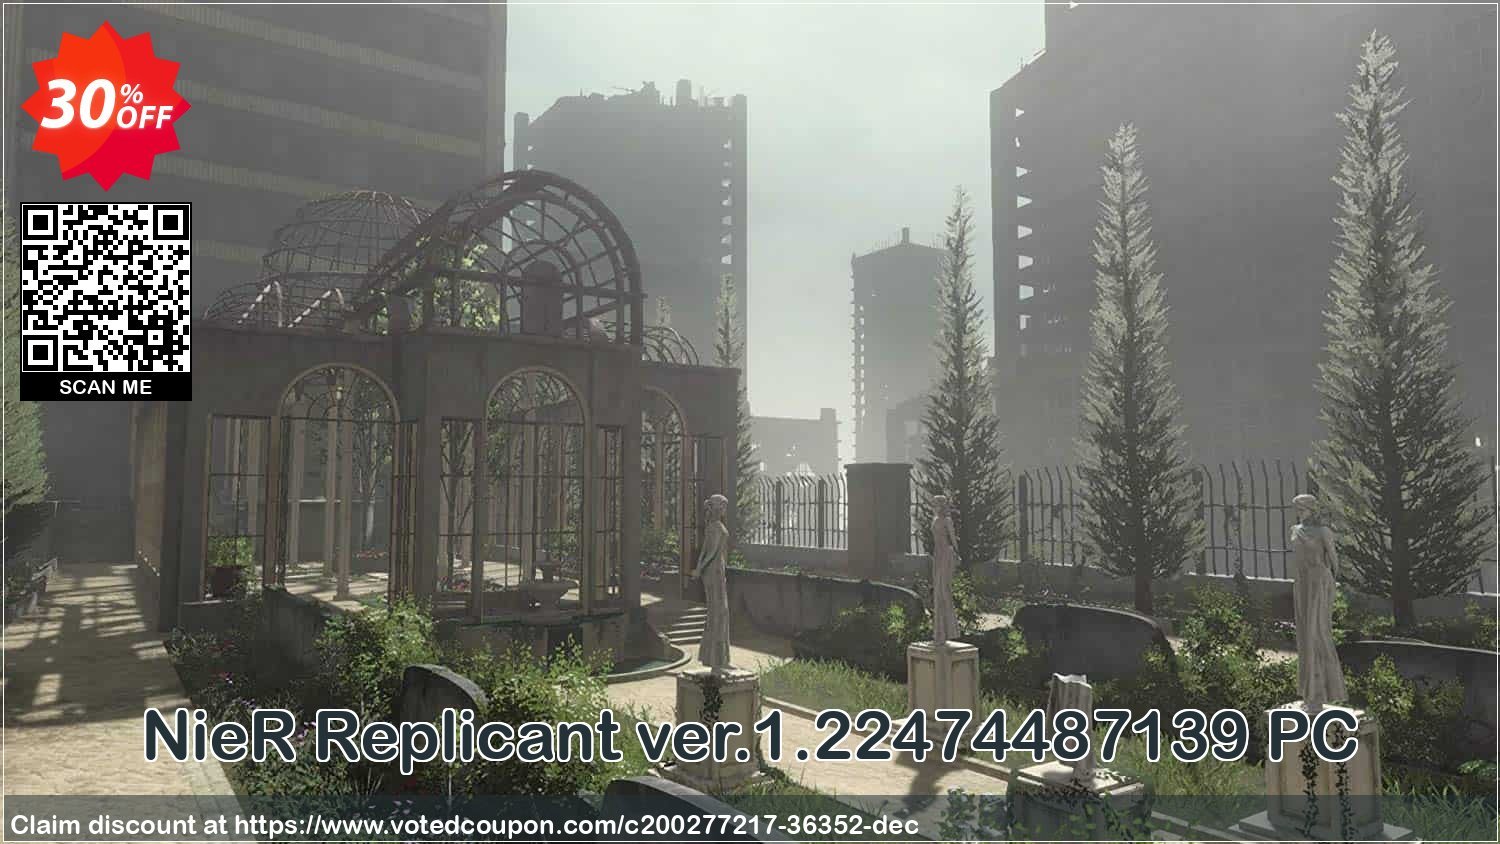 NieR Replicant ver.1.22474487139 PC Coupon Code May 2024, 30% OFF - VotedCoupon